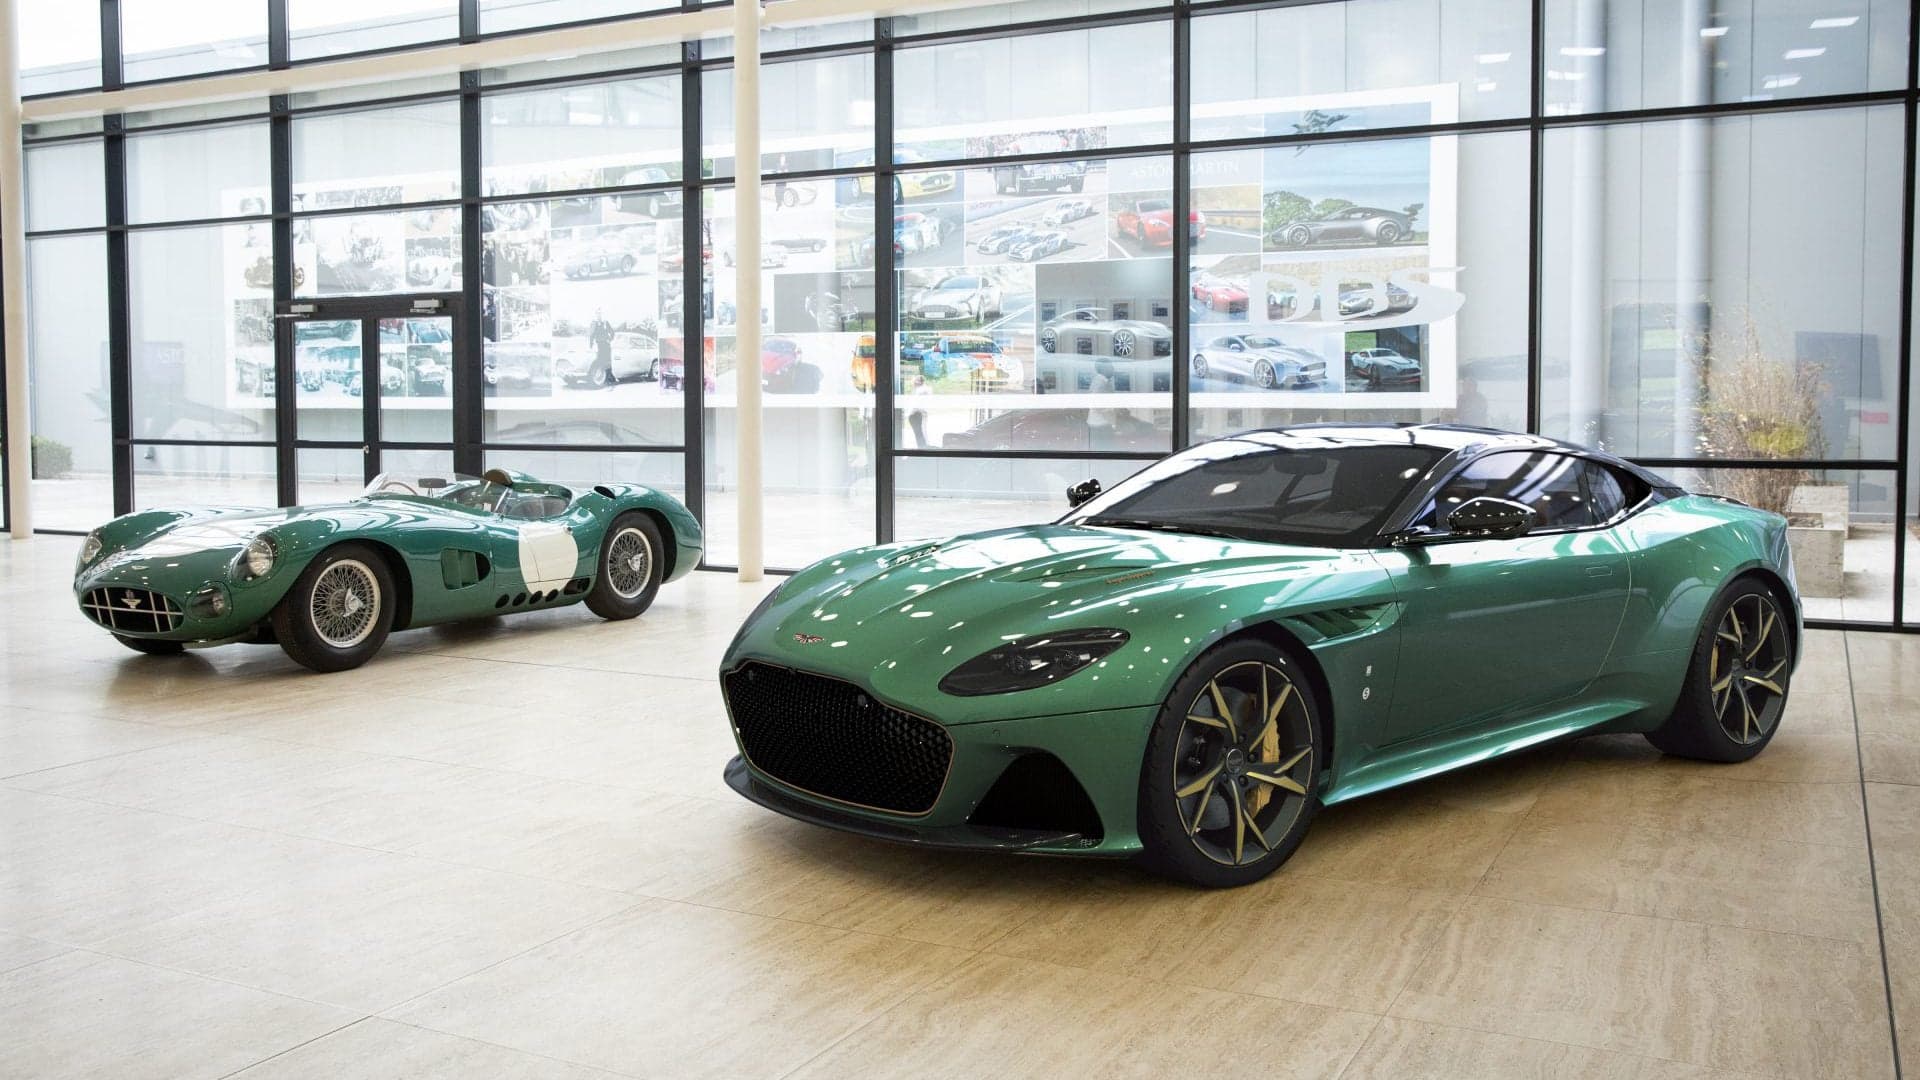 New Aston Martin DBS 59 Special Edition Pays Tribute to Le Mans-Winning DBR1 Racers